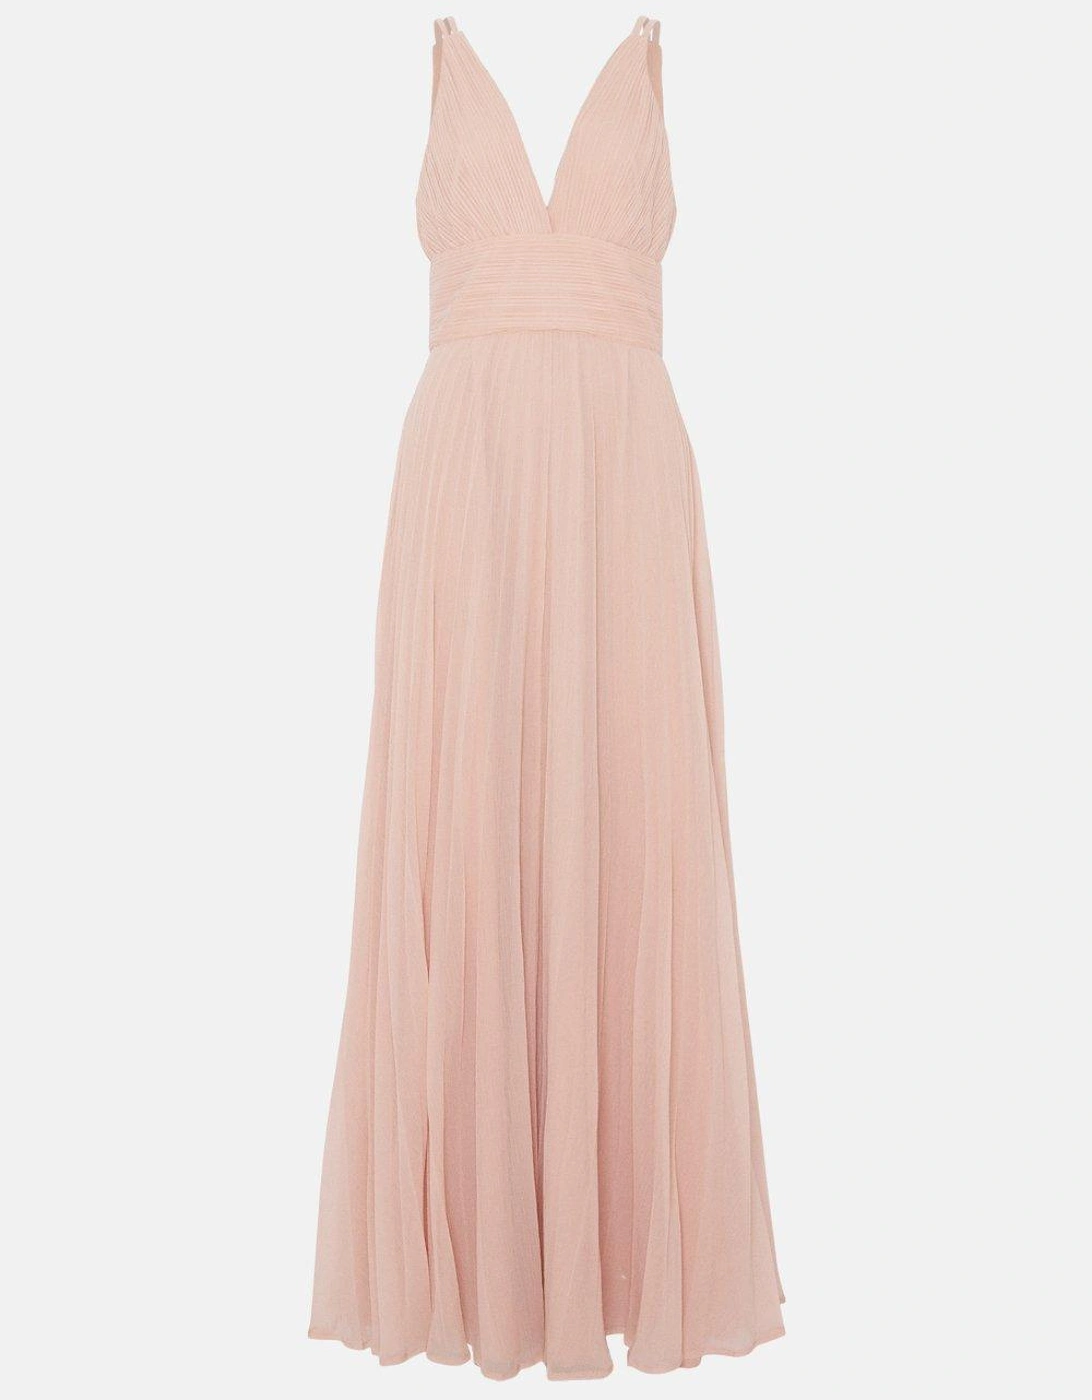 Double Strap Pleated Skirt Maxi Dress